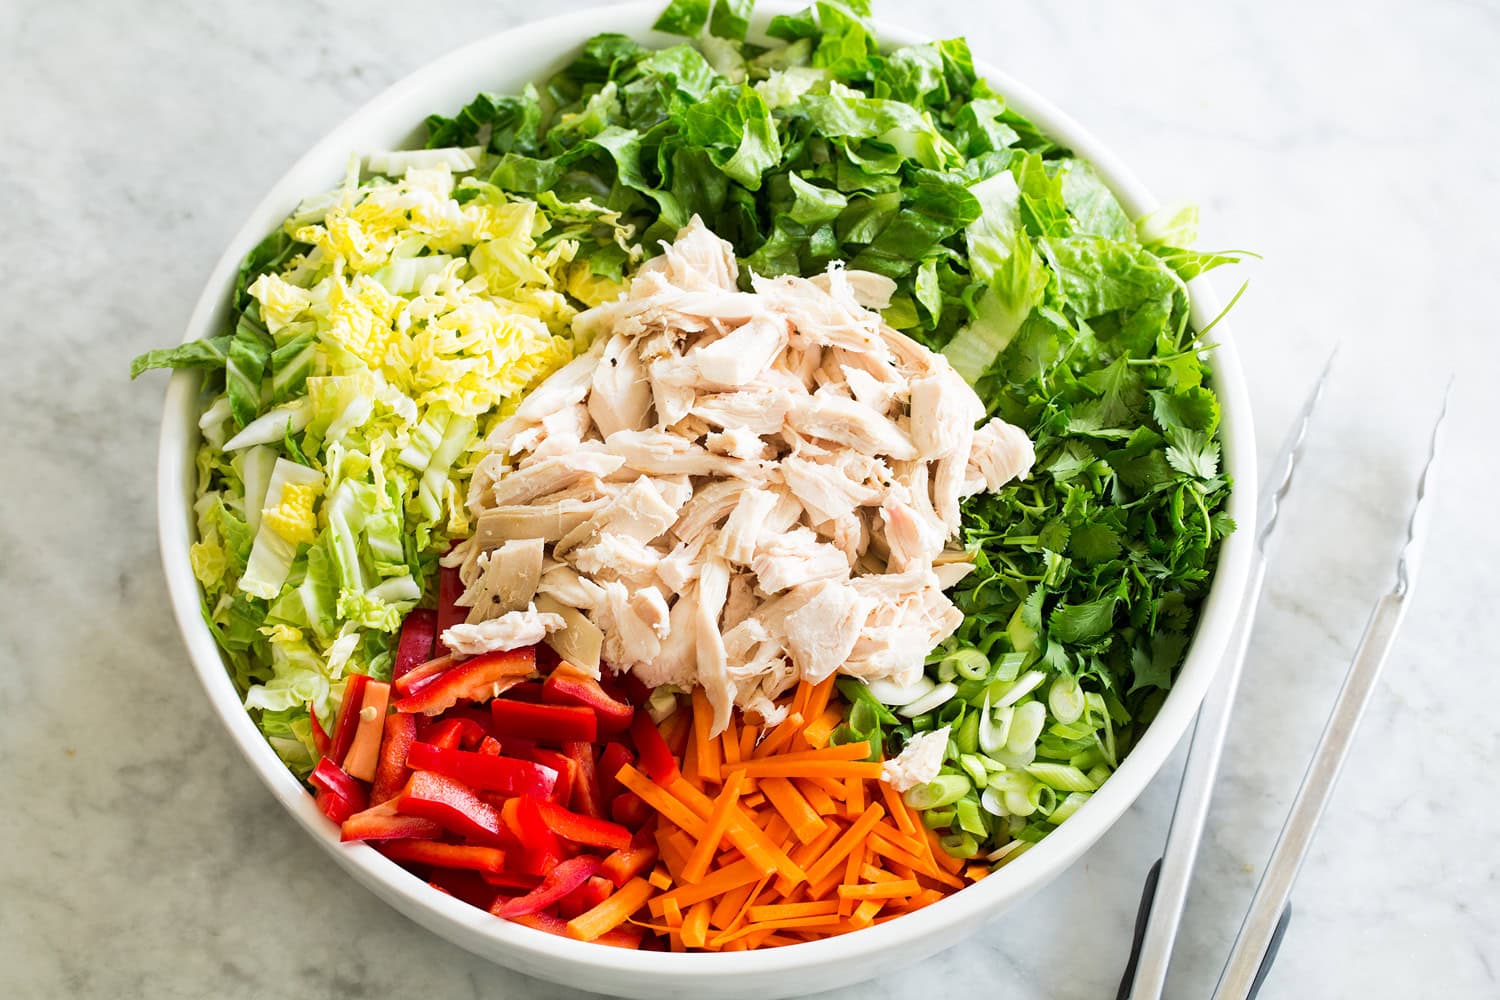 Chinese chicken salad ingredients shown before tossing.